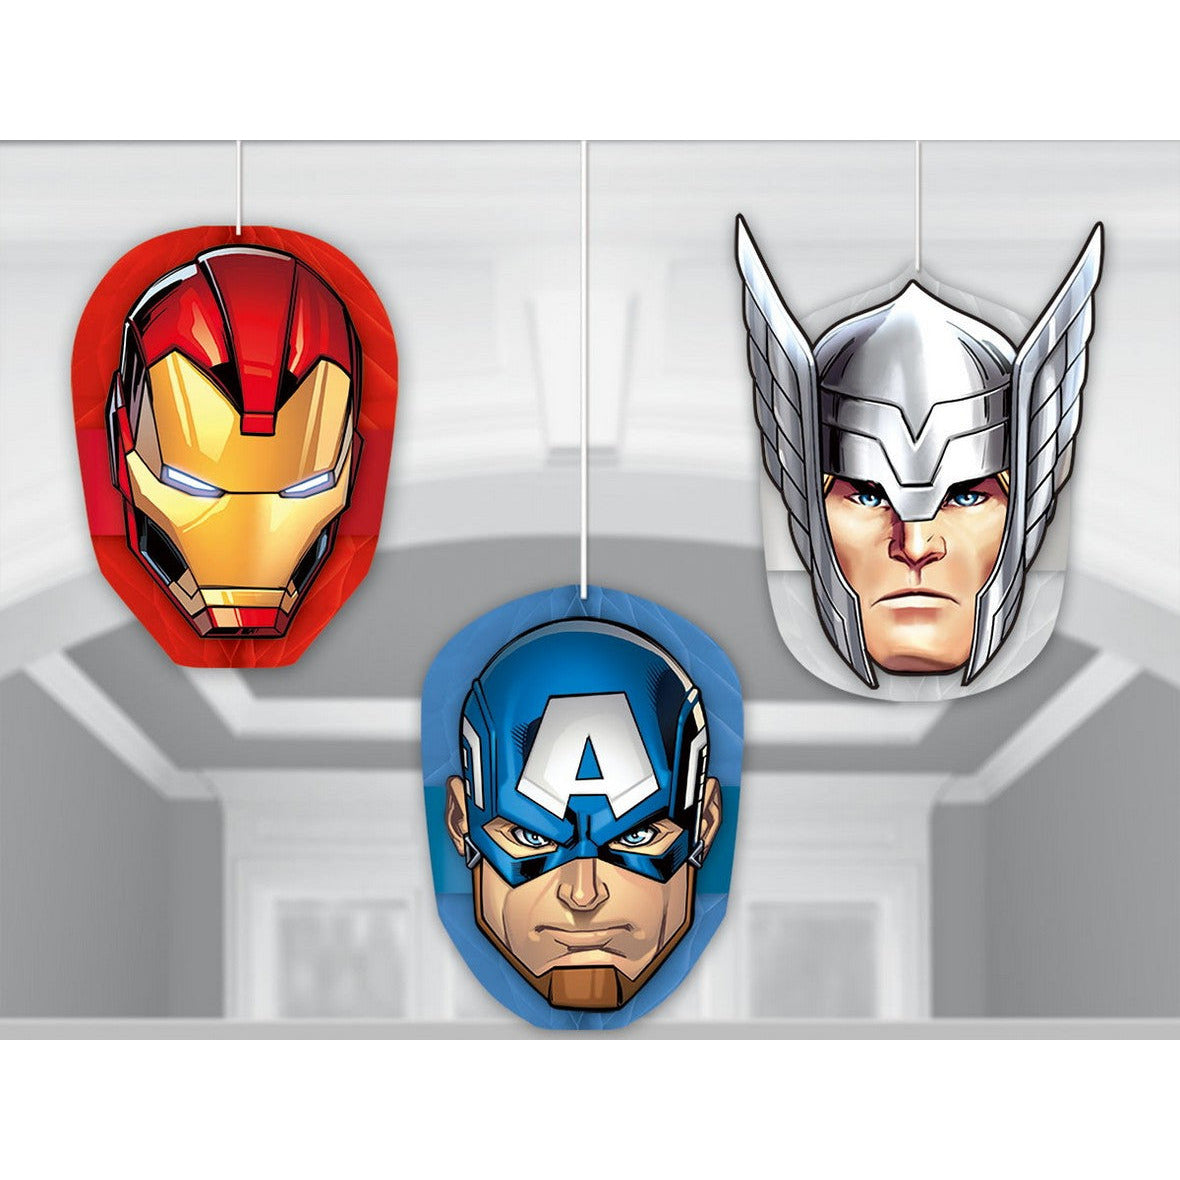 Marvel Avengers Epic Honeycomb Decorations Tissue and Printed Paper - 3 Pack Default Title